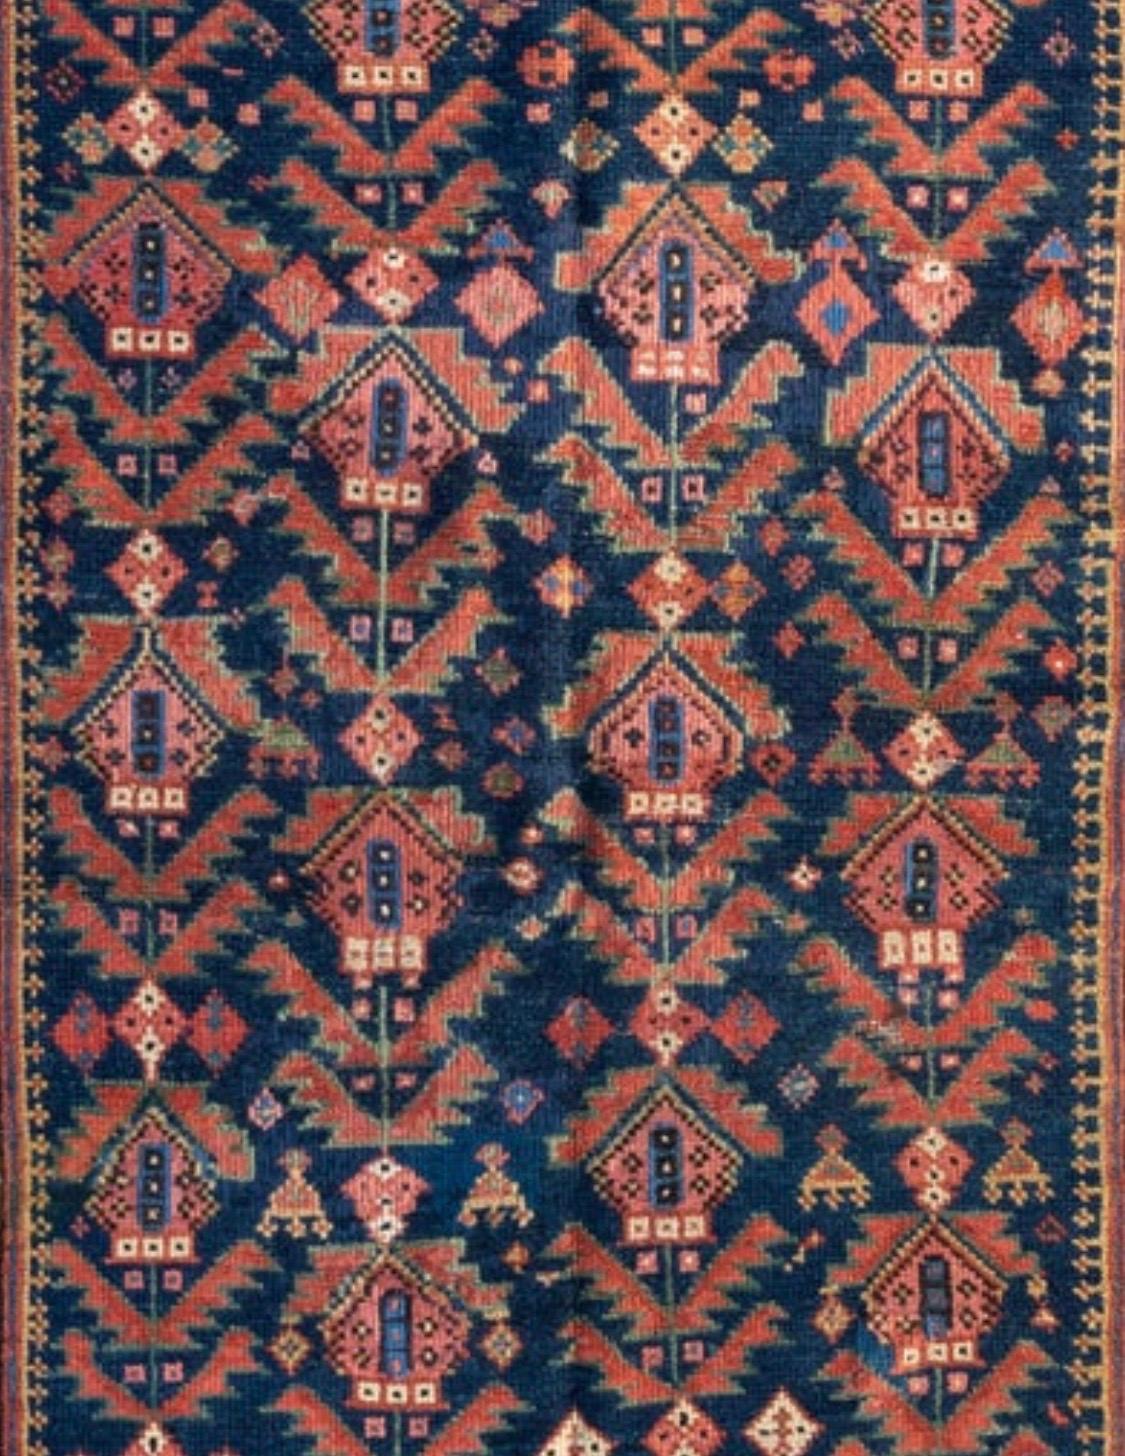 Hamadan is the capital of an eponymous province, and it’s one of the oldest cities in Persia. It’s also one of Persia’s most productive and diverse weaving centers. Like other cities in the western part of Persia, Hamadan produced Fine, coarse